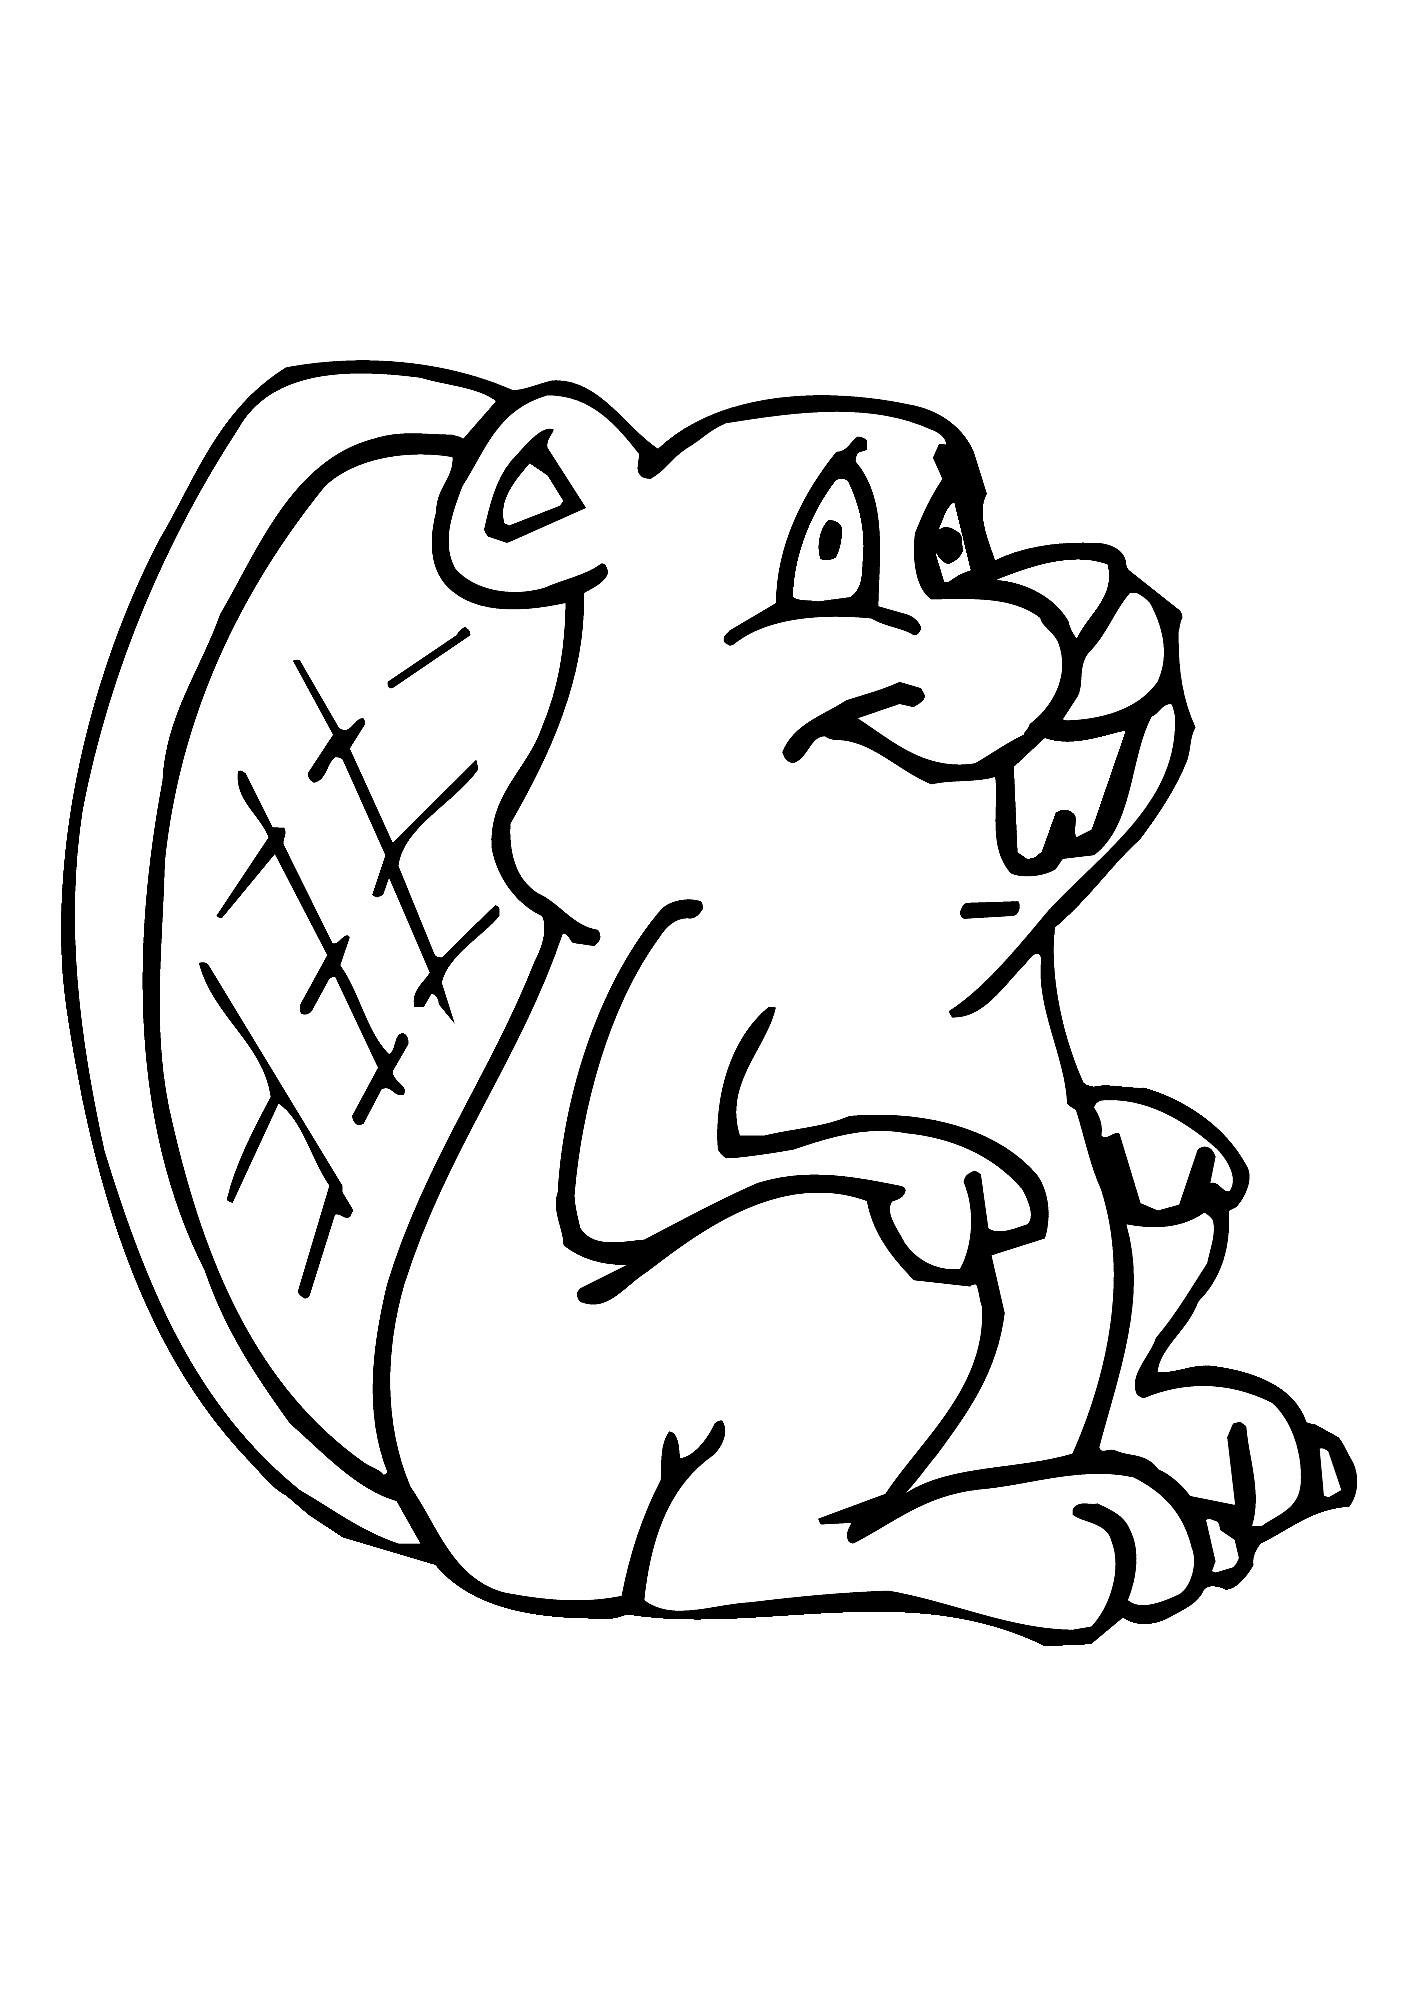 Beaver Smile Coloring Page